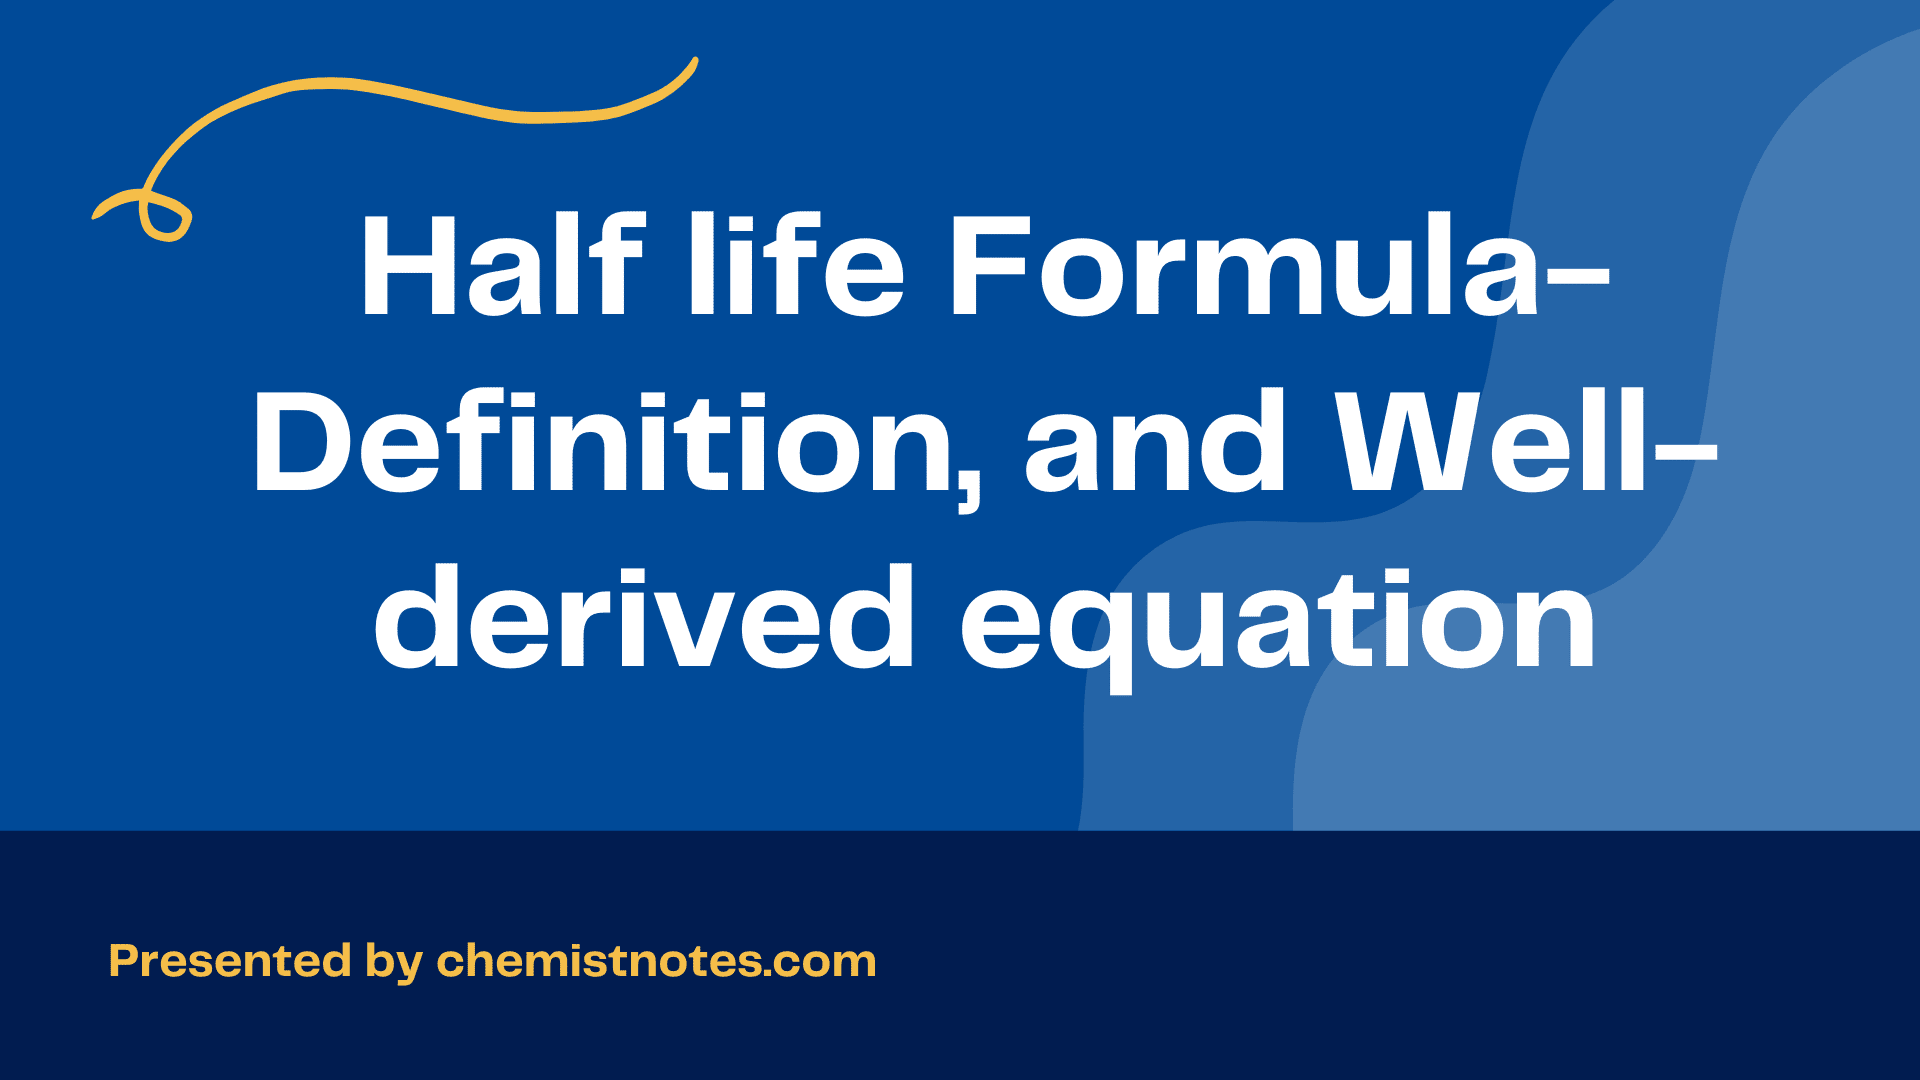 half-life-formula-definition-and-well-derived-equation-chemistry-notes